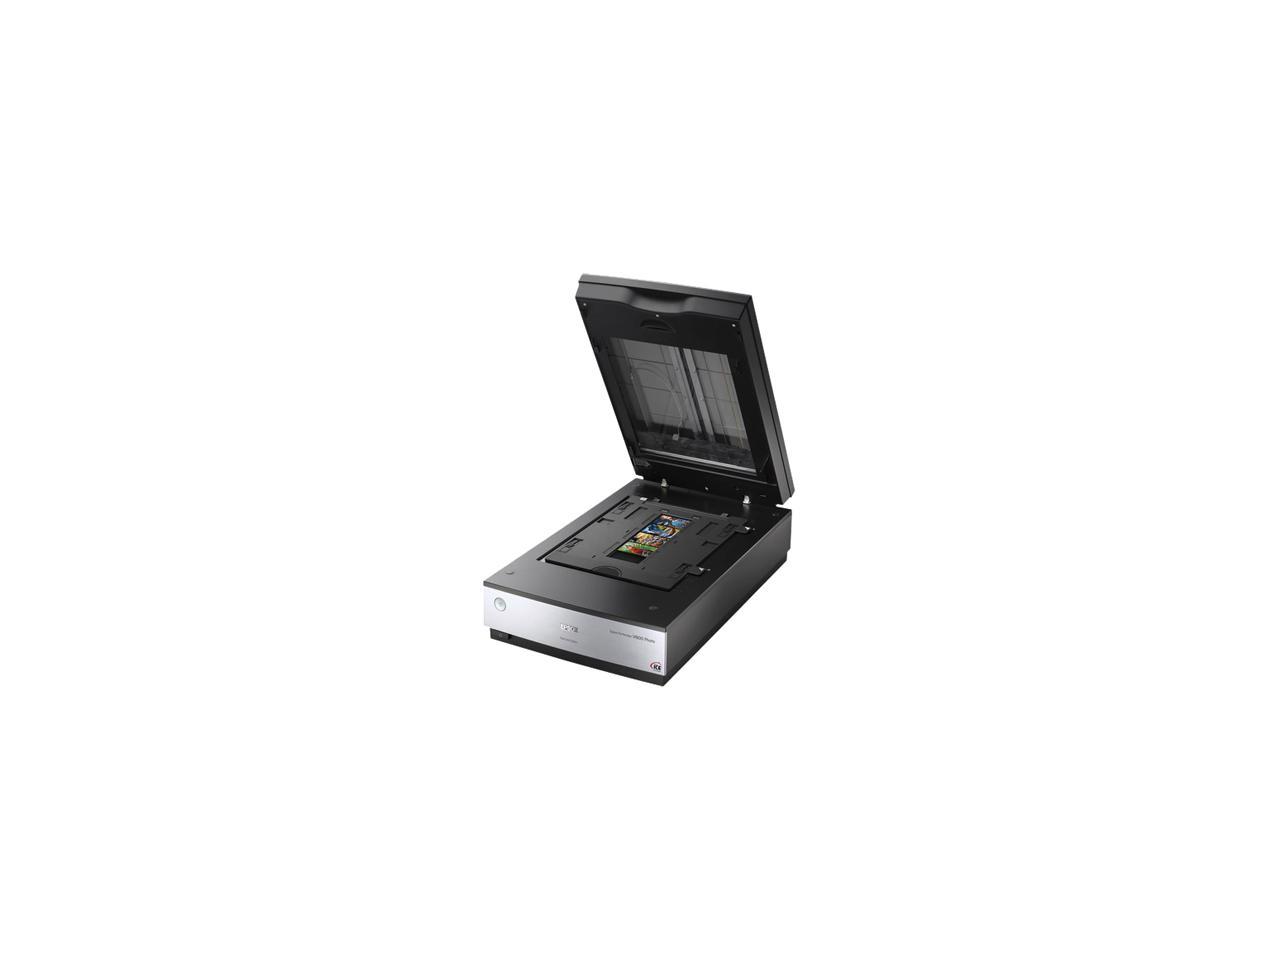 Epson Perfection V800 Photo Color Scanner 8362